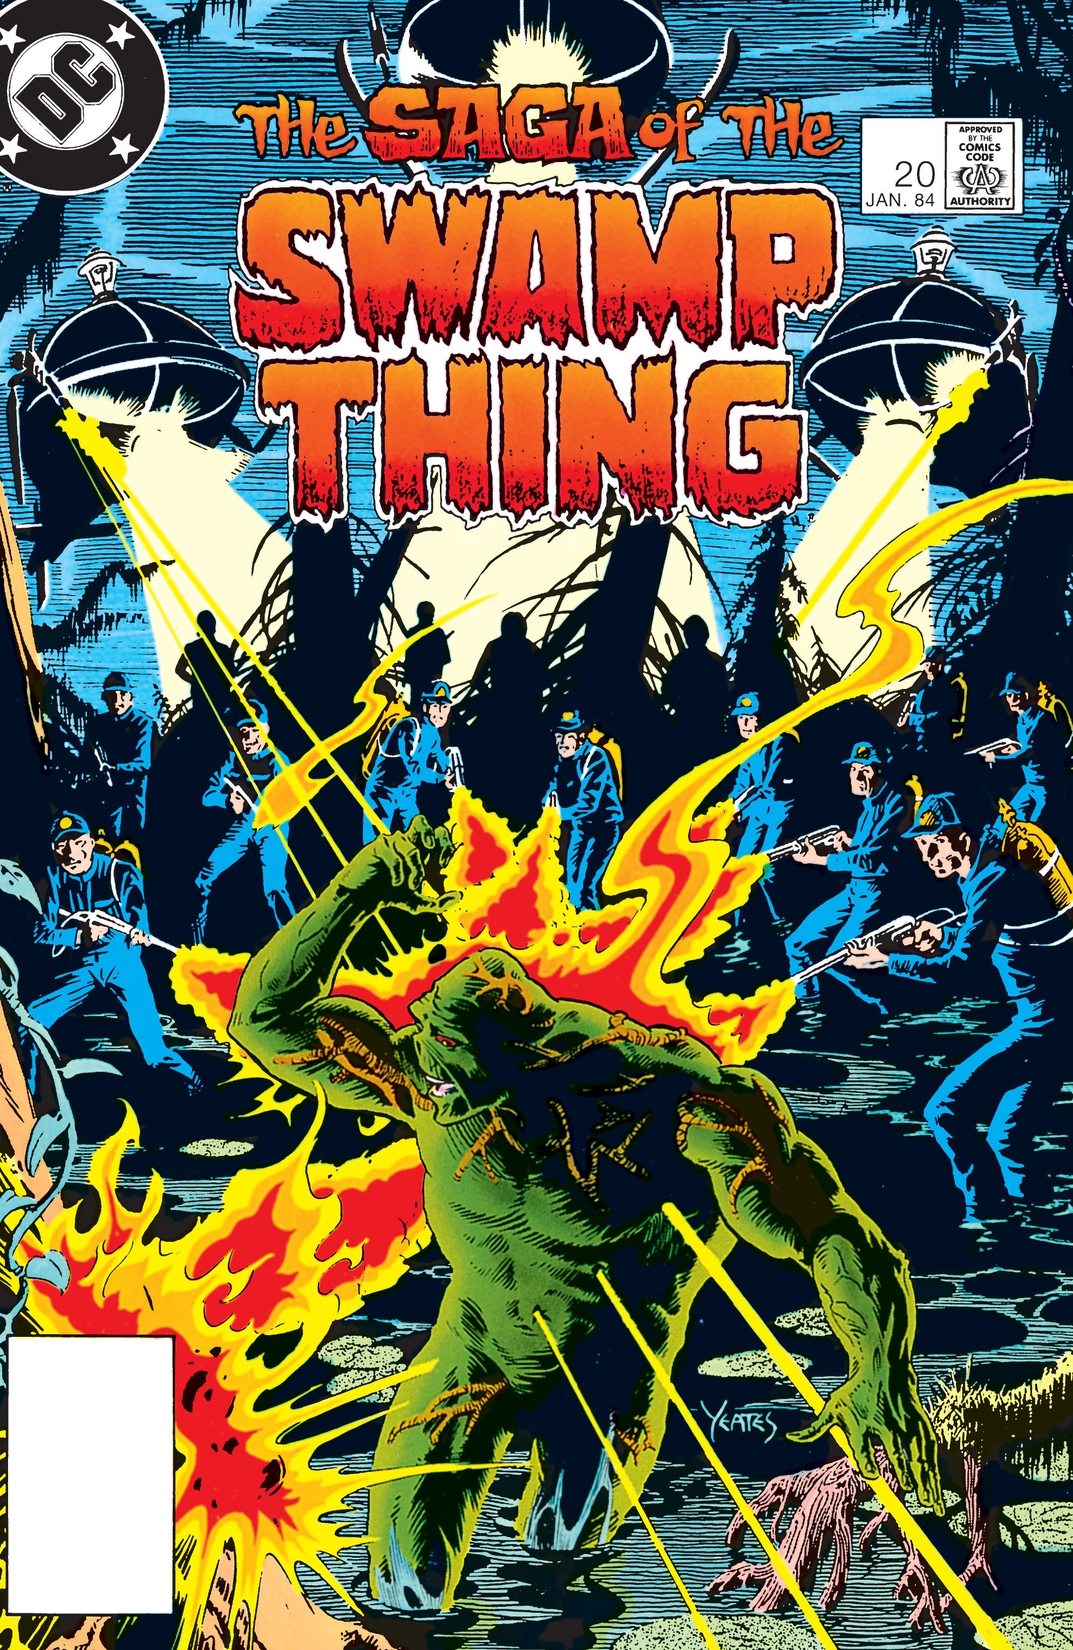 The Saga of the Swamp Thing (1982-) #20 preview images